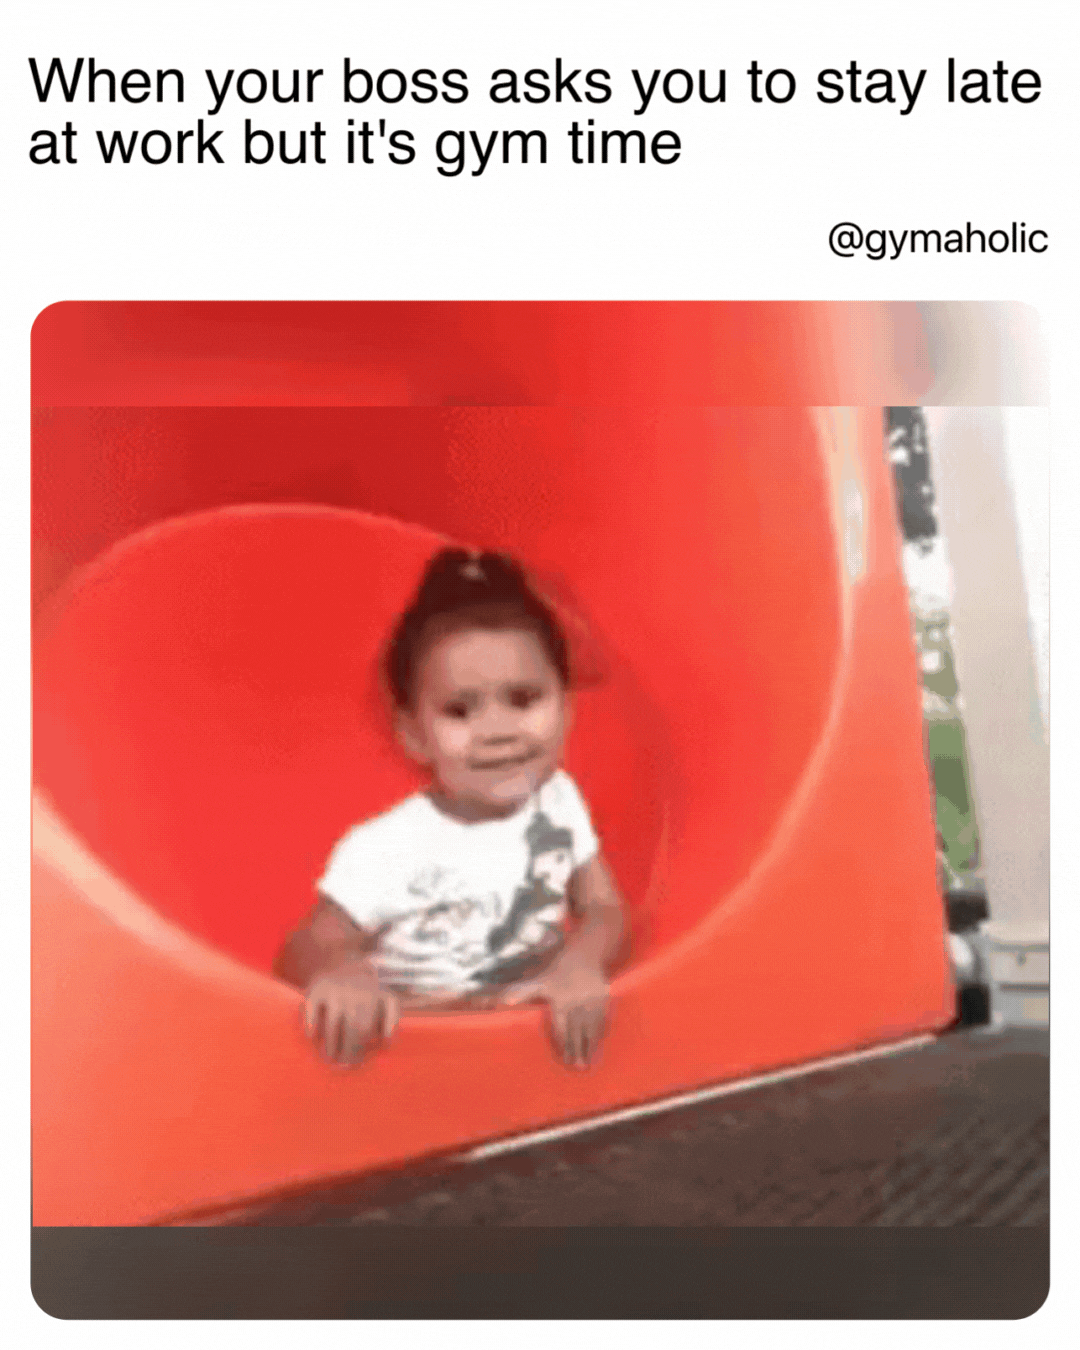 When your boss asks you to stay late at work but it’s gym time